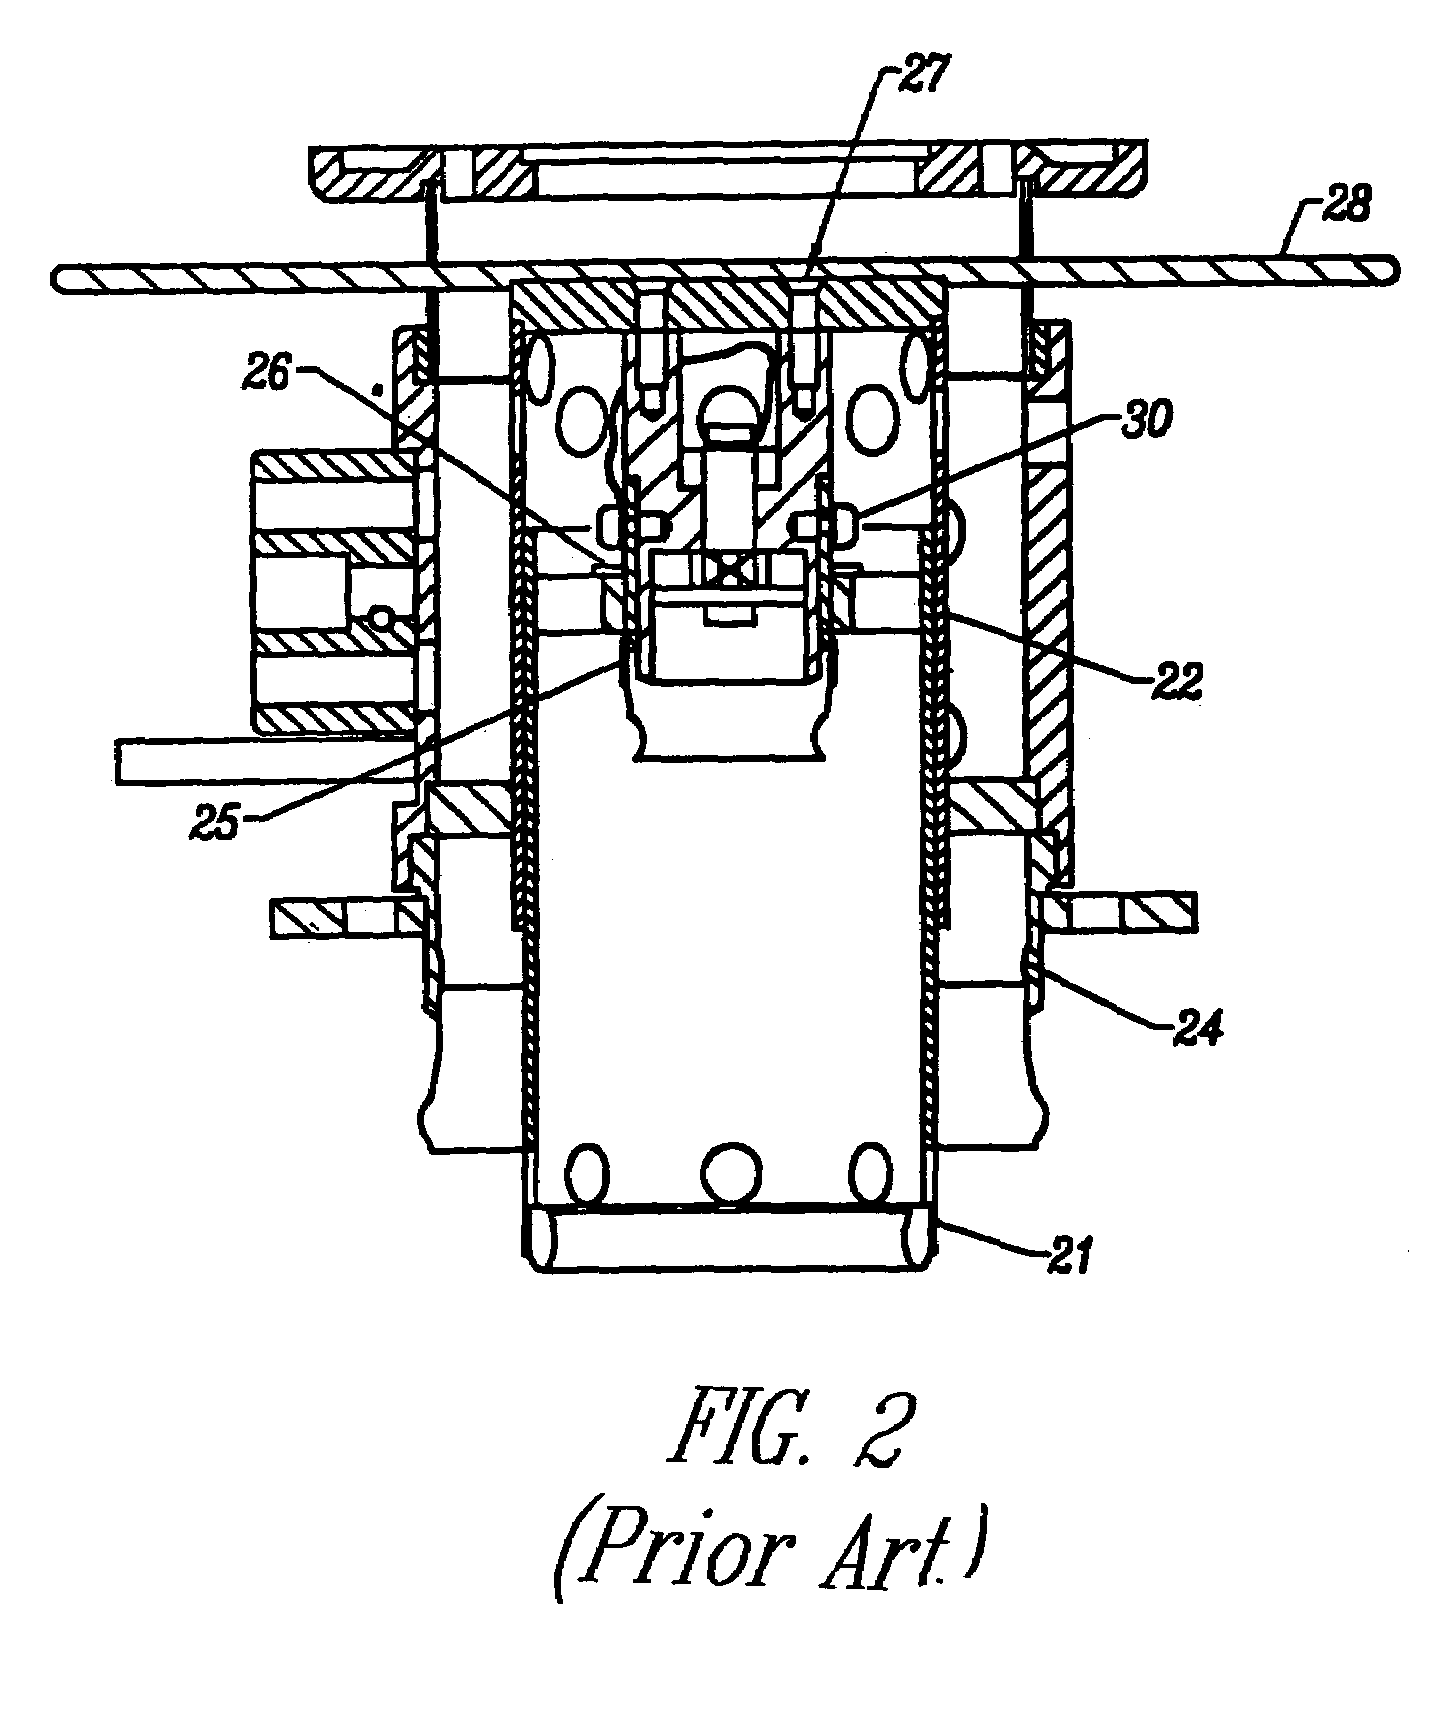 Cover assembly for vacuum electron device